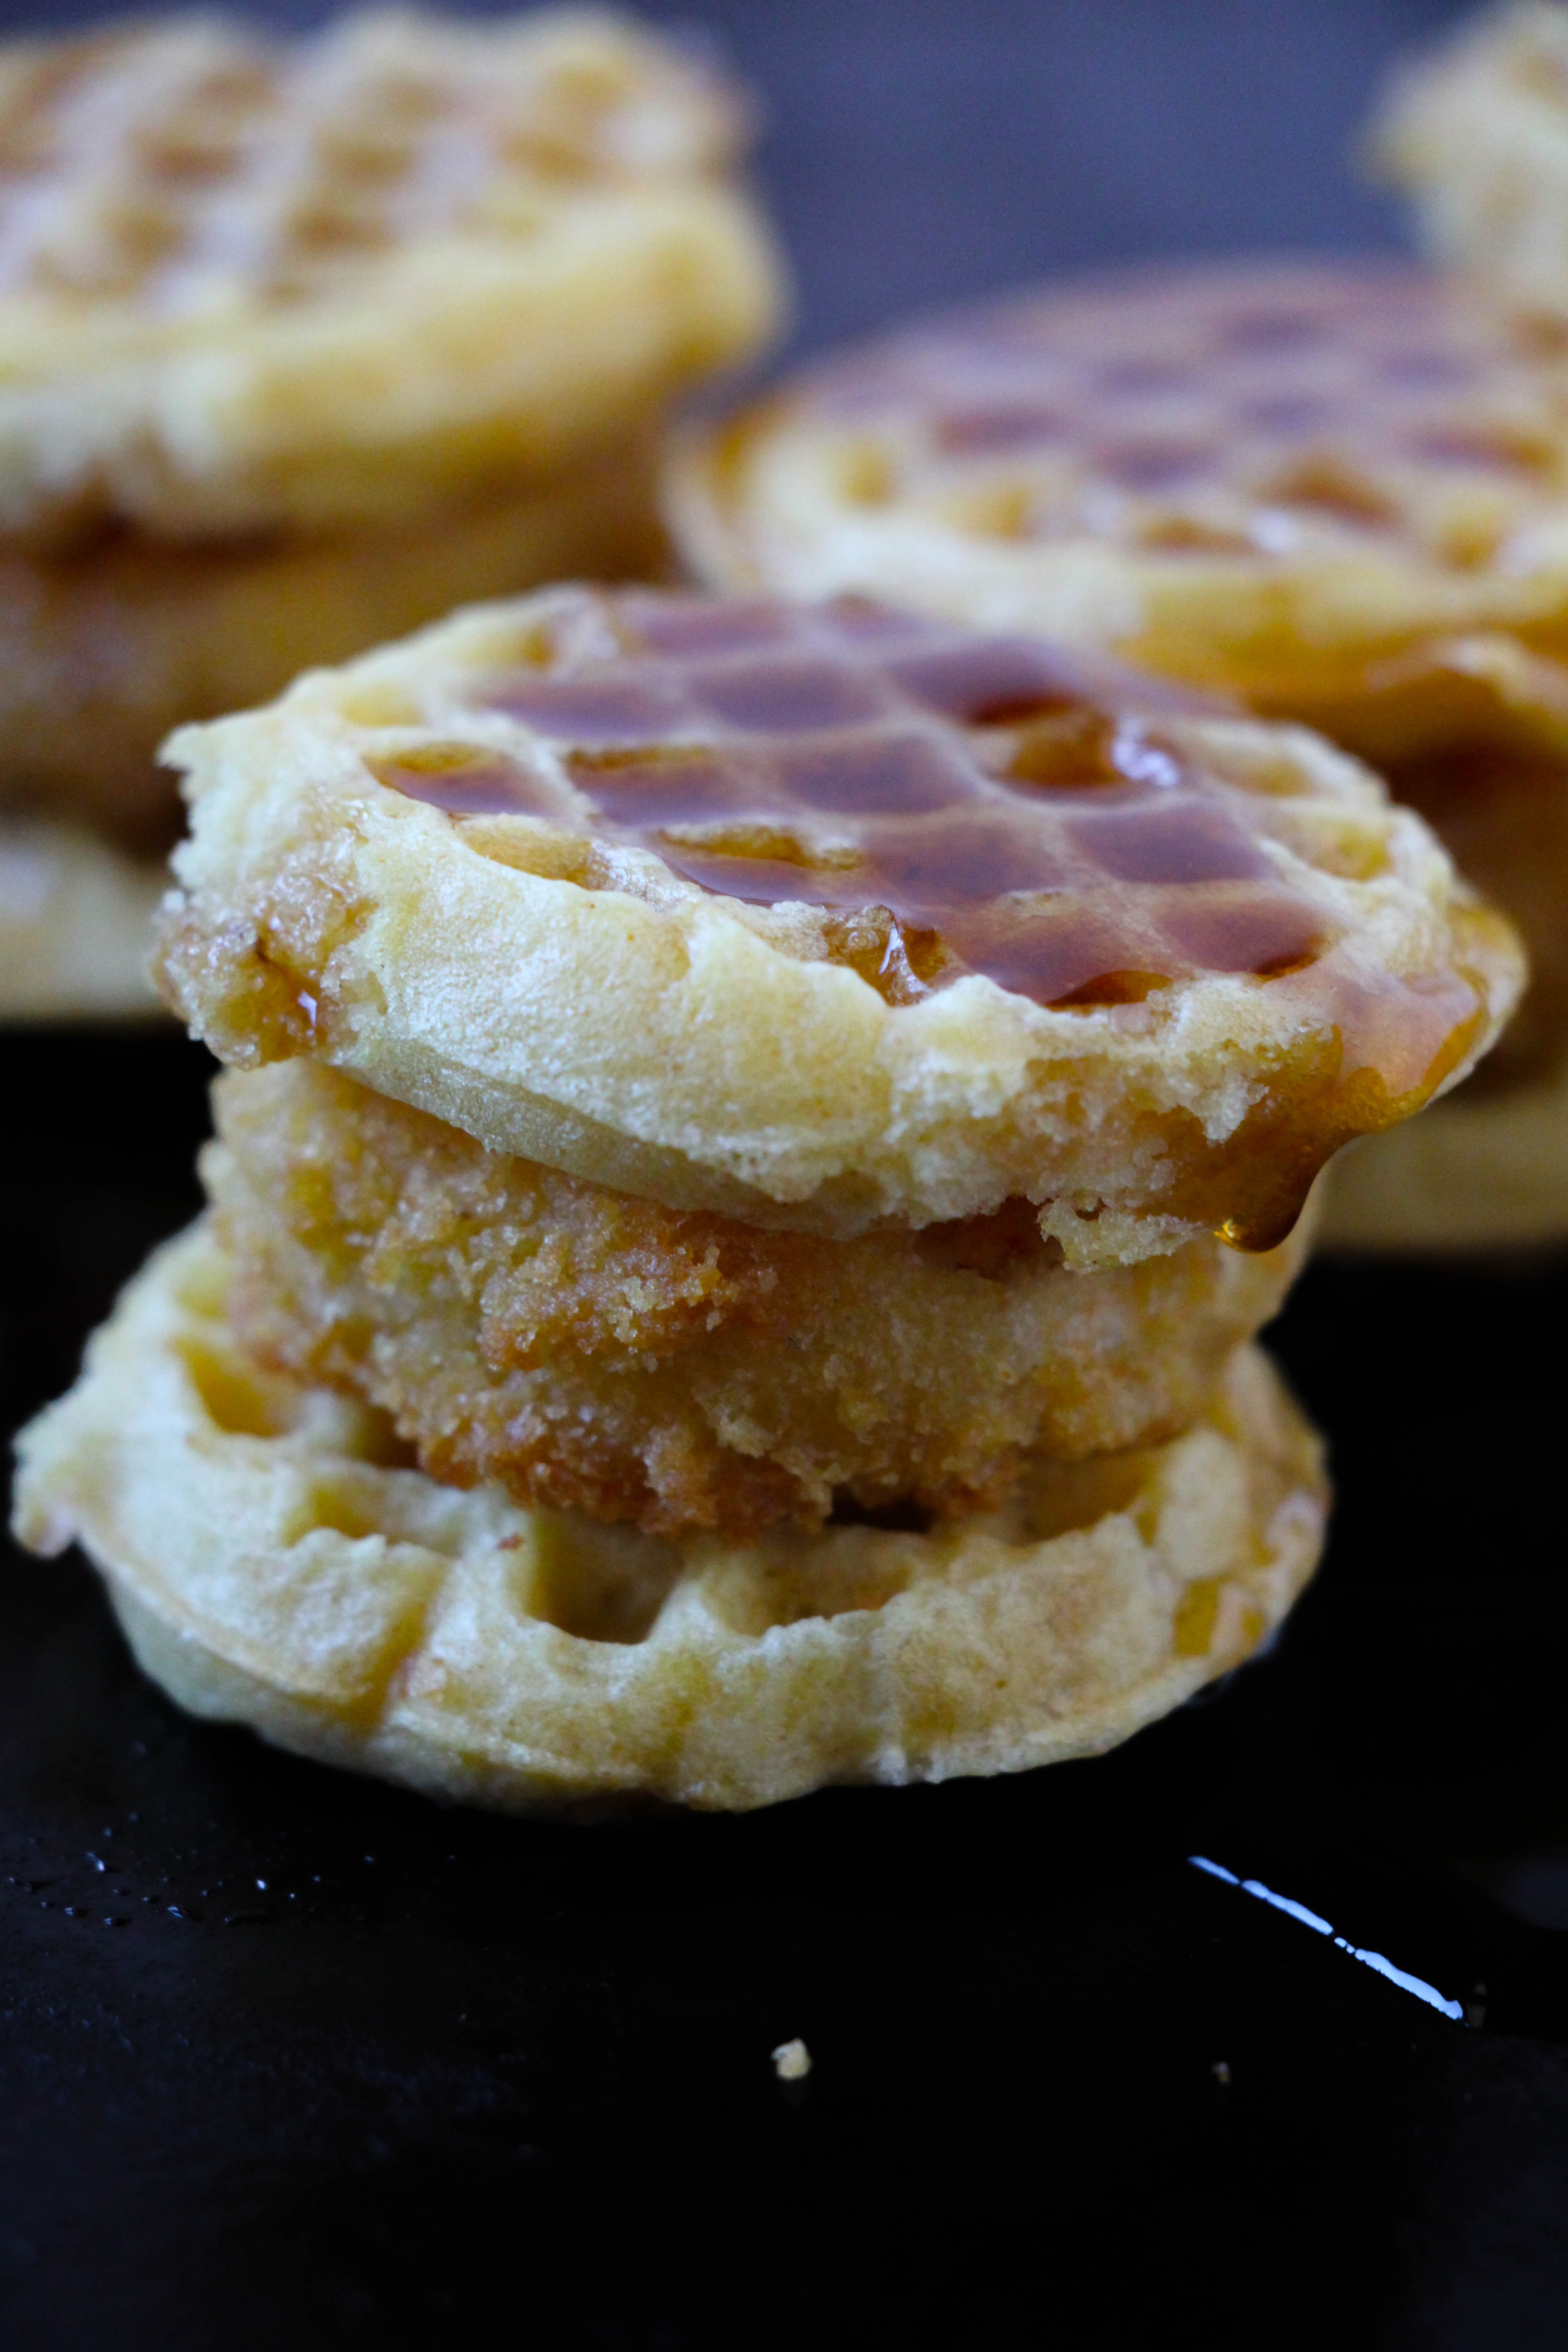 Want to know how to make Chicken and waffle slider at home? My chicken and waffle sliders are so good for game day snacks or as a fun dinner. No matter when you serve this chicken and waffles recipe, you can be sure everyone will love them.